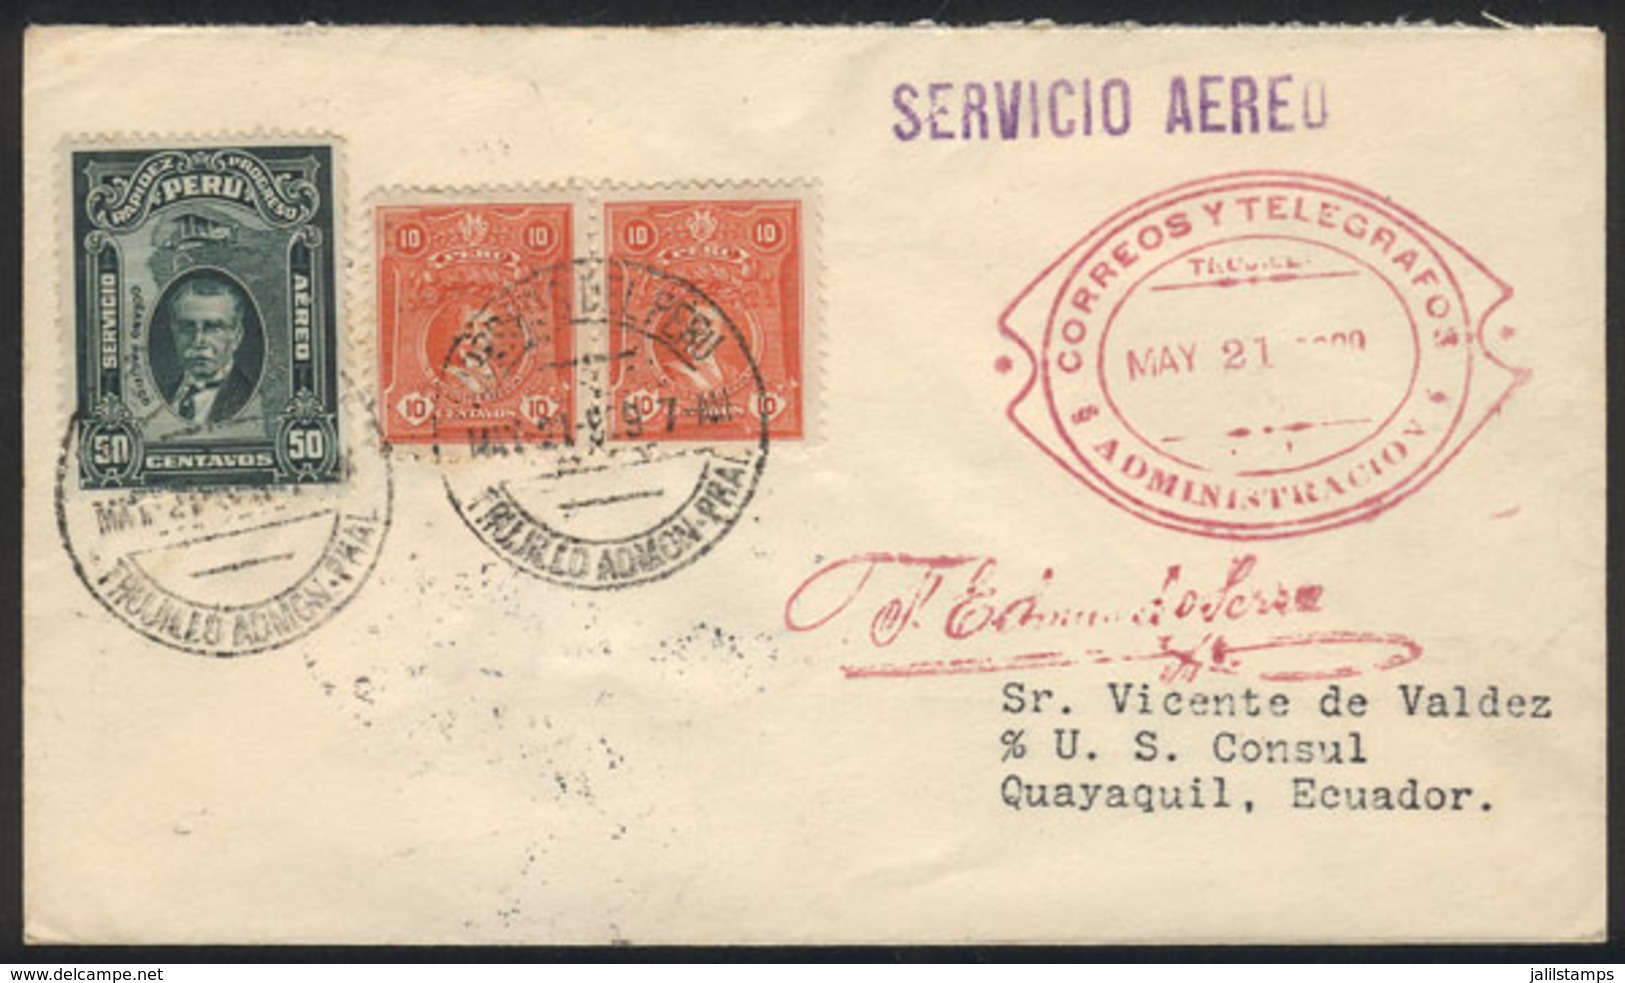 PERU: 21/MAY/1929 First Flight Trujillo - Guayaquil, Cover Franked With 70c., With Transit Backstamp Of Paita 23/MAY And - Peru